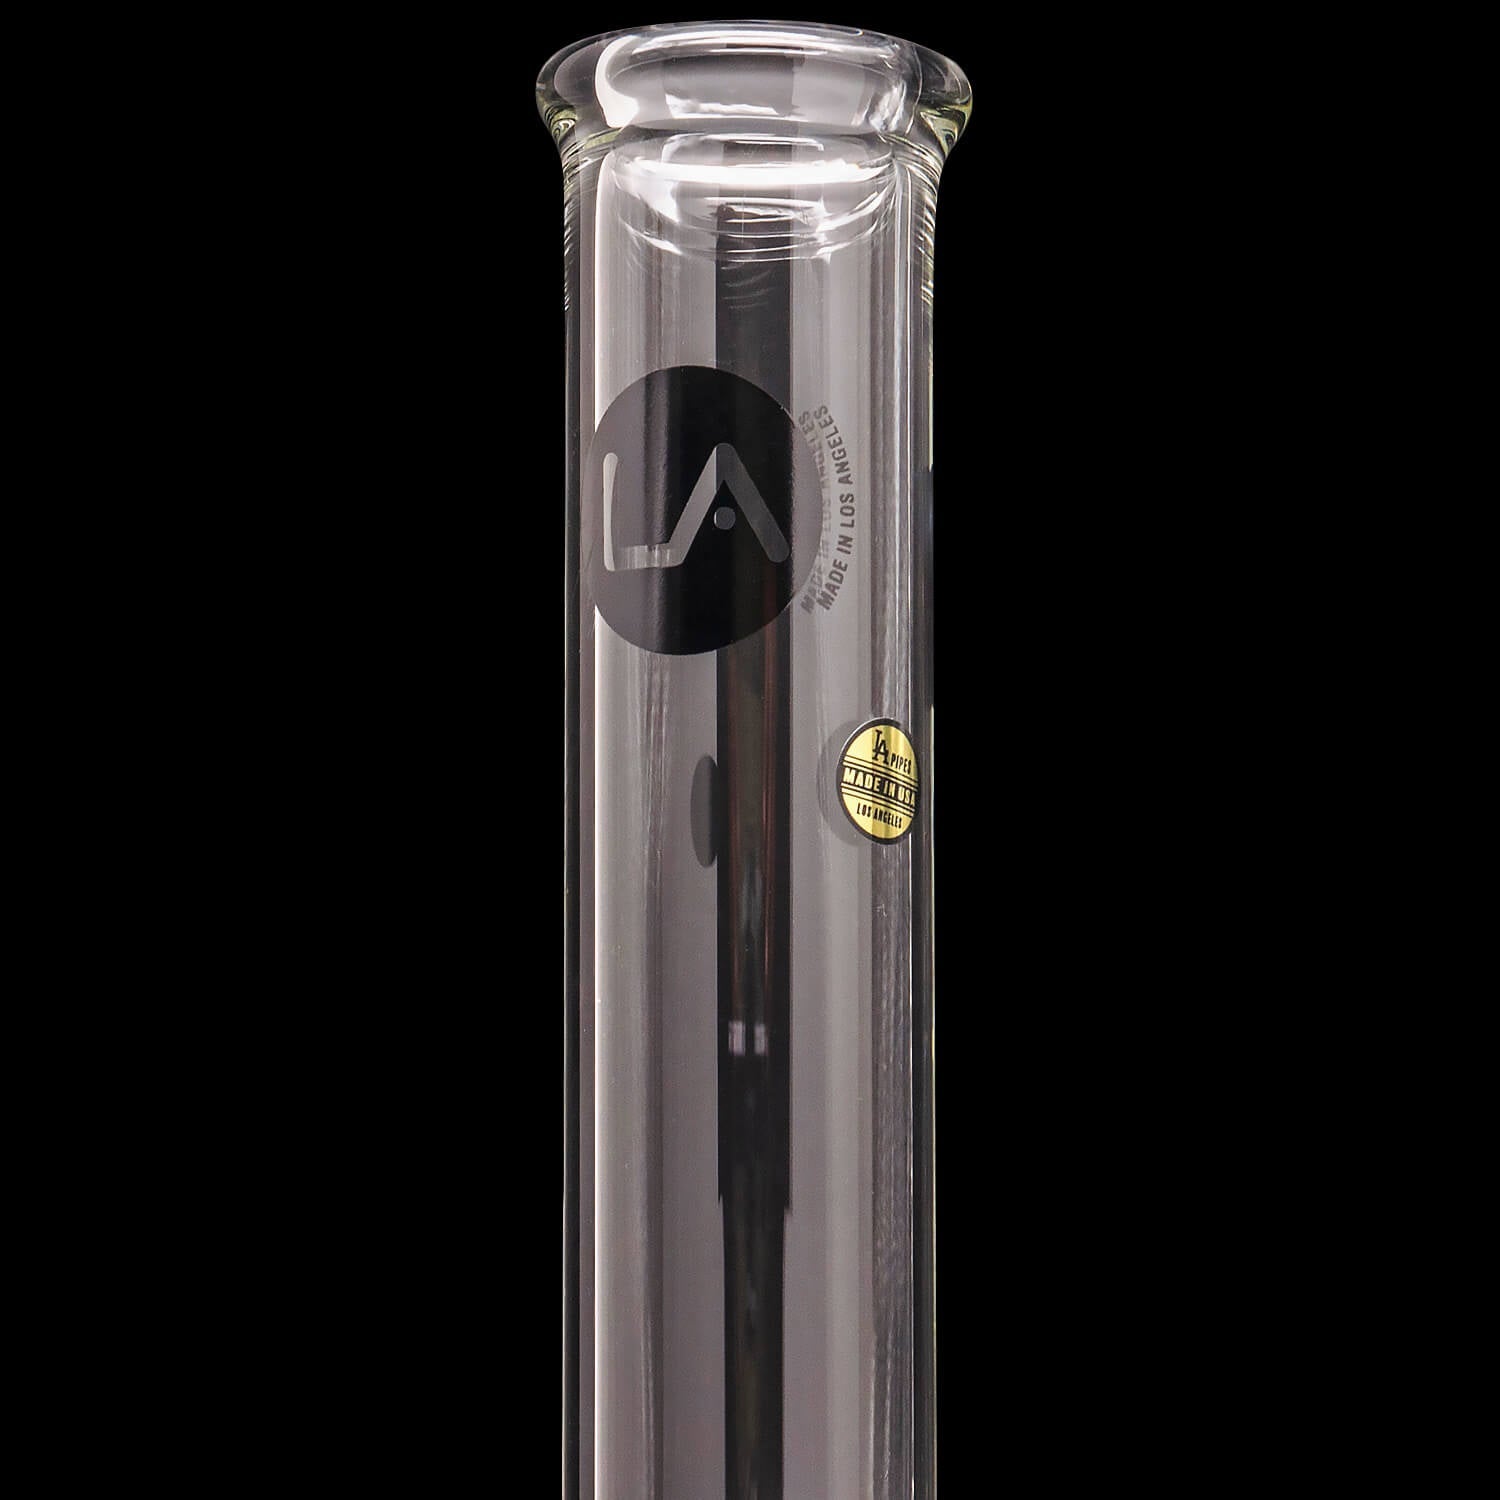 LA Pipes 12" Clear Straight Shot Bong (ONLINE ONLY)